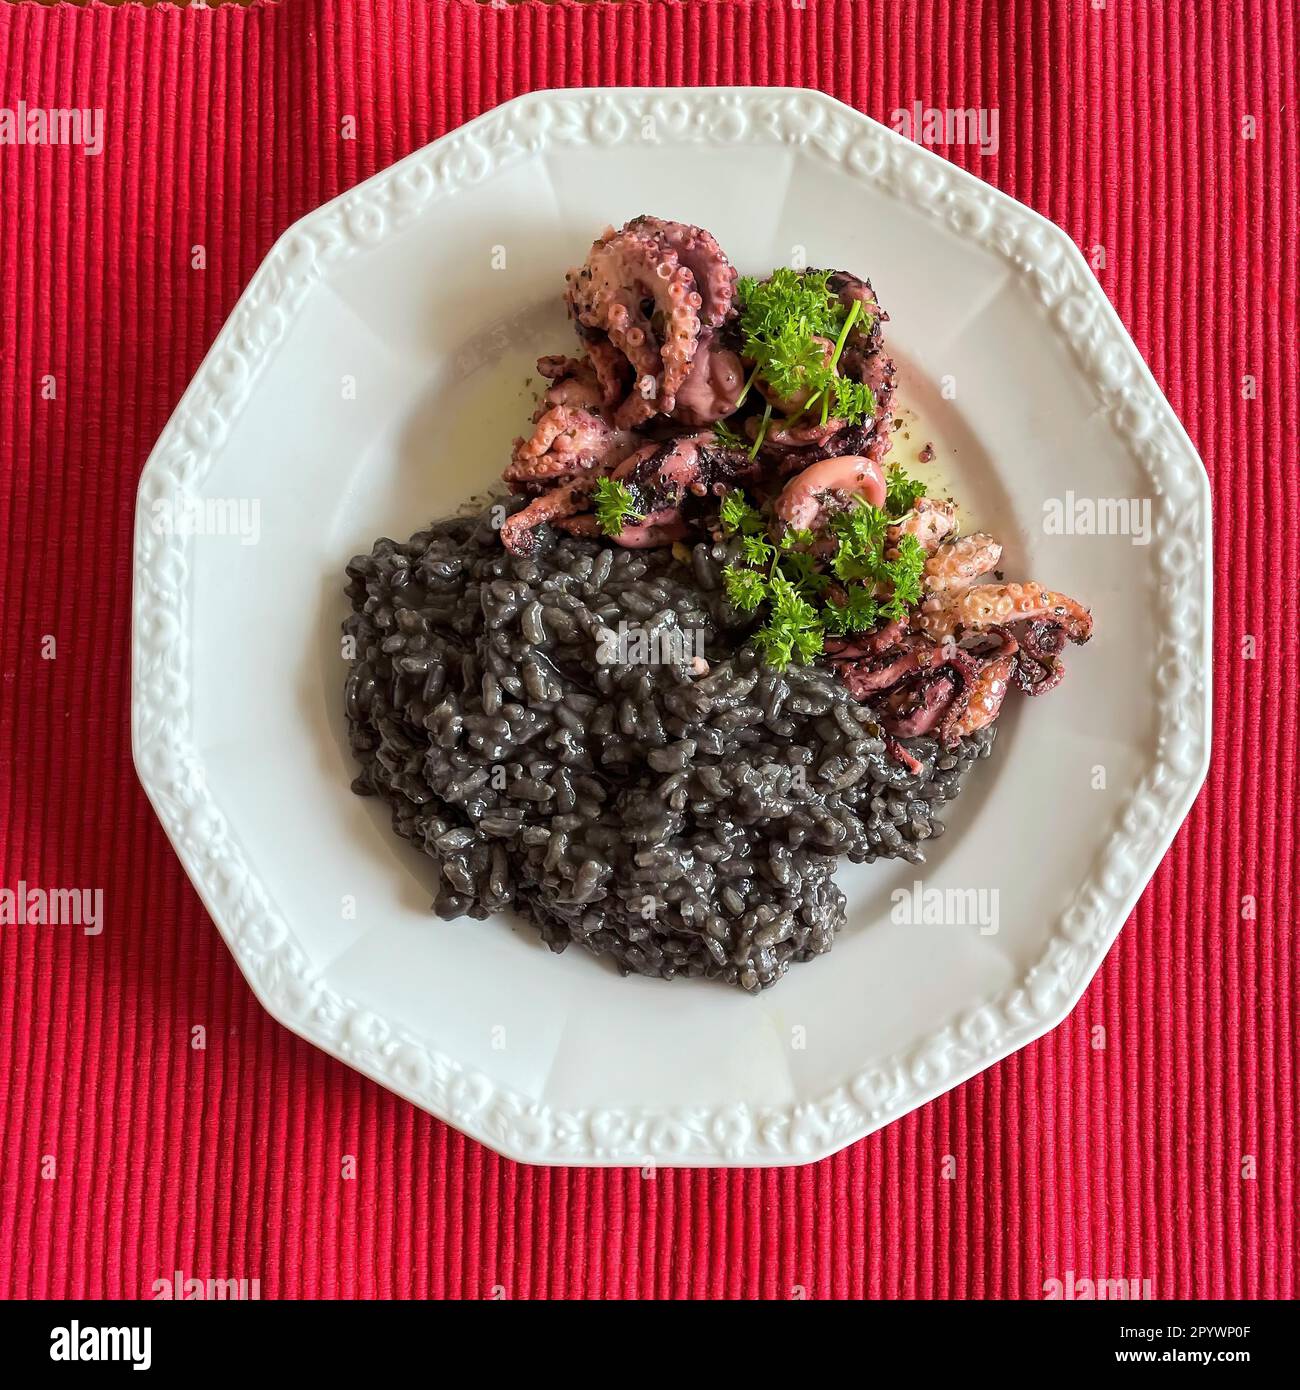 Italian dish from Italian cuisine Black risotto nero with octopus garnished with parsley, Italy Stock Photo